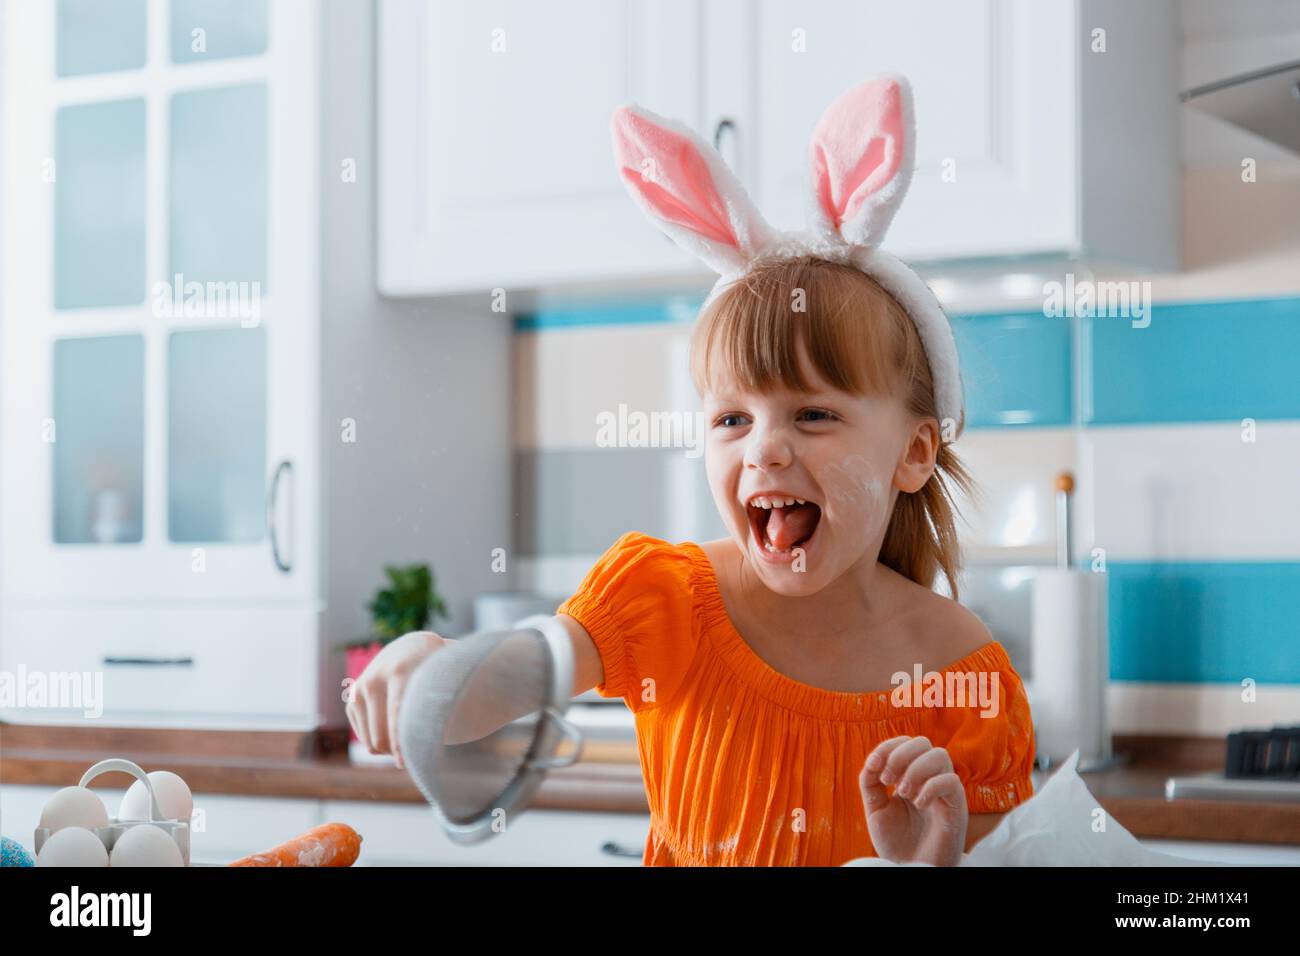 Emotional portrait of cheerful little girl dressed as bunny for Easter While cooking food in kitchen at home. Girl kid child having fun laughs plays Stock Photo